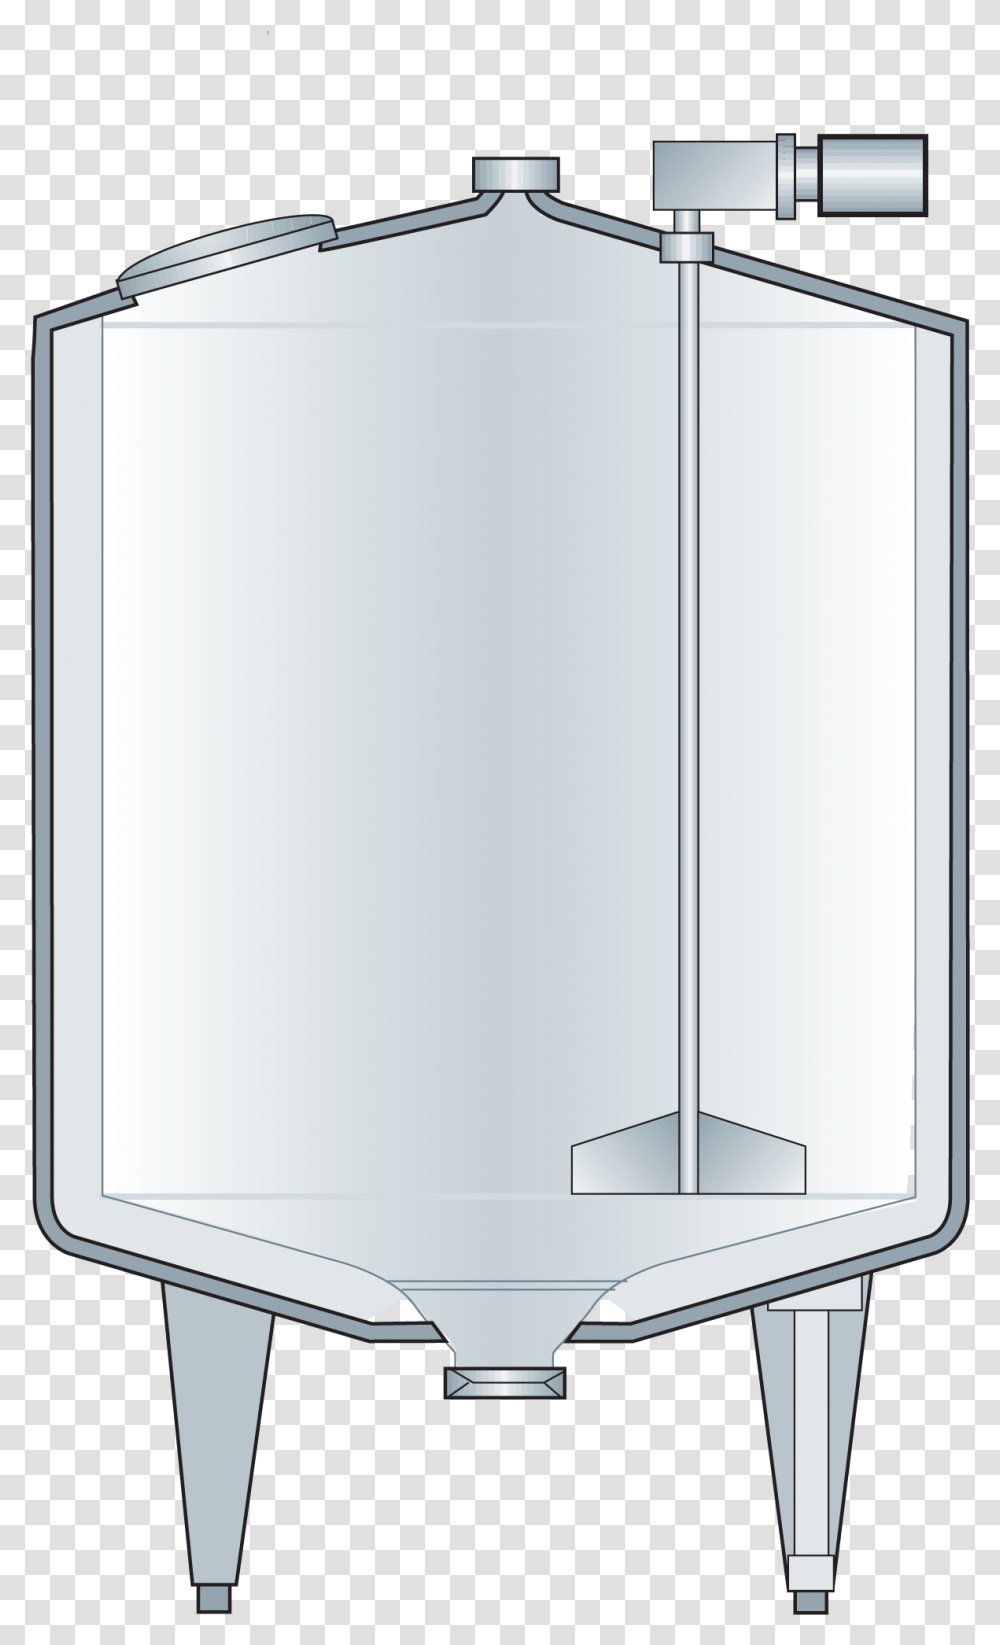 Lampshade, Appliance, Heater, Space Heater, Can Transparent Png